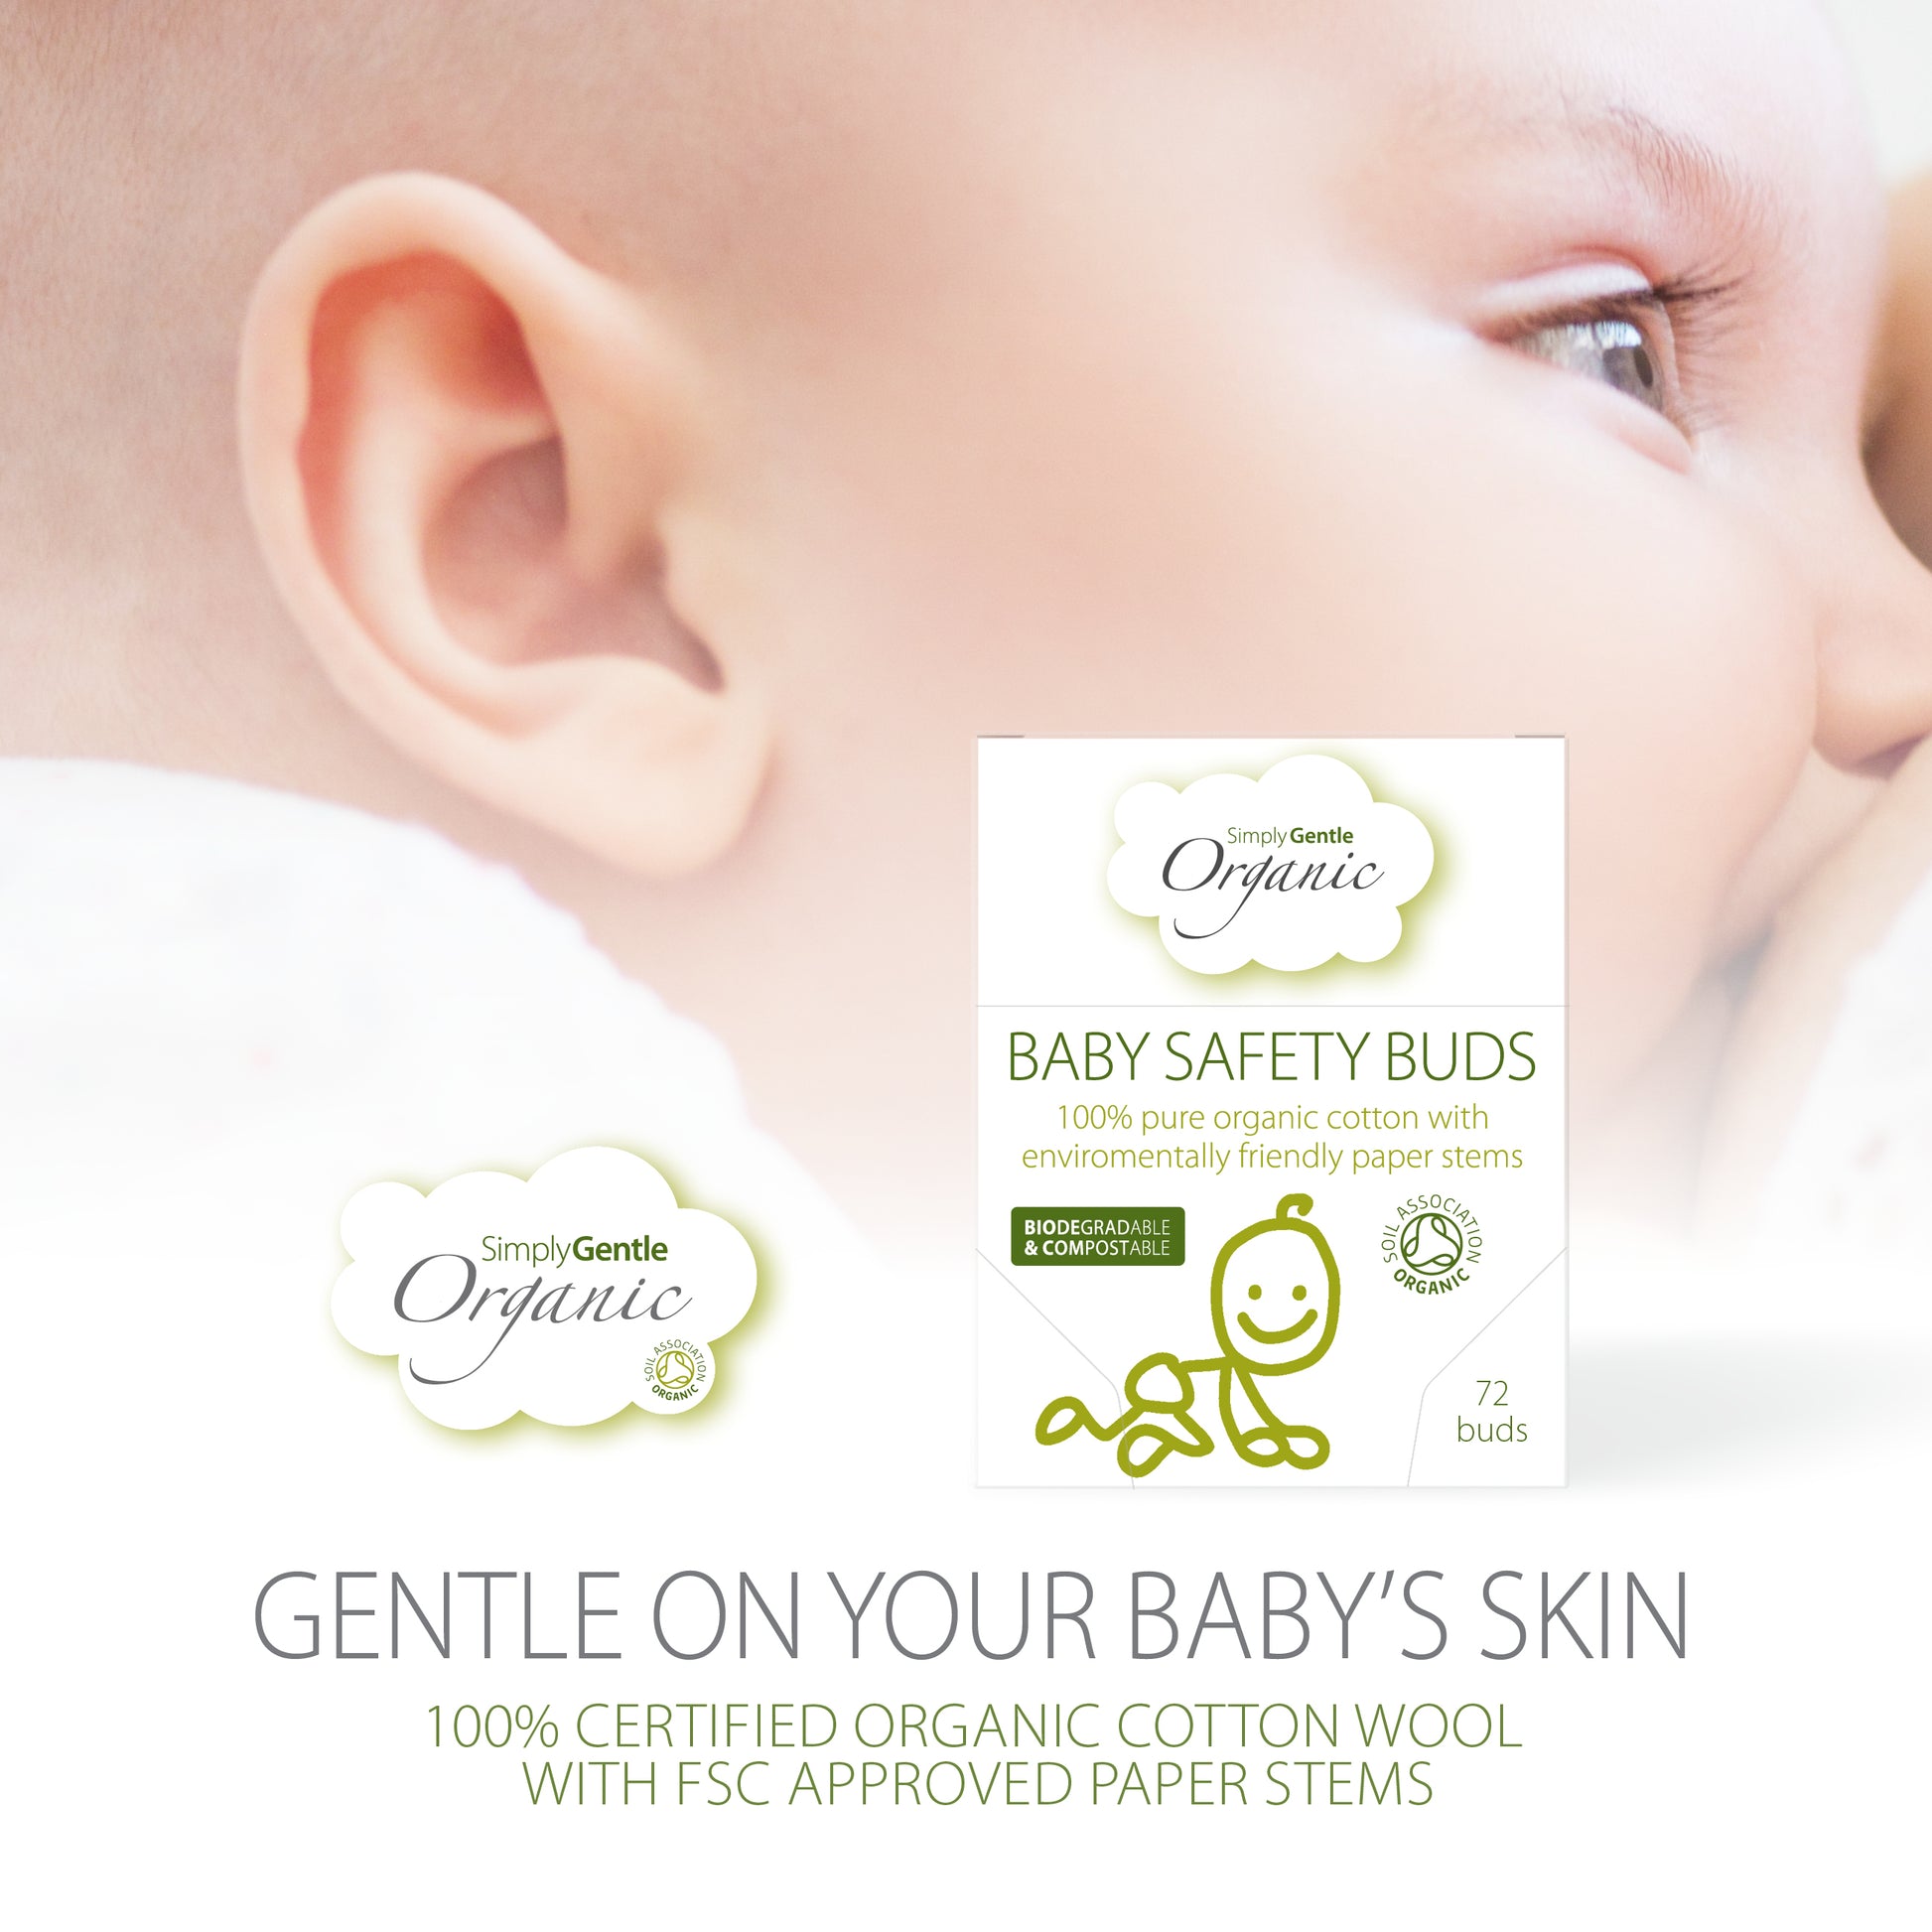 Simply Gentle Baby Safety Buds are made with 100% cotton tips making them soft and gentle on baby’s delicate skin. Specially designed with the extra large safety tips making them perfect for cleaning delicate areas, around your baby’s eyes, outer ears and navel. Also ideal for make-up, beauty and skincare needs. Composition: 100% certified organic cotton wool with FSC approved paper stems.